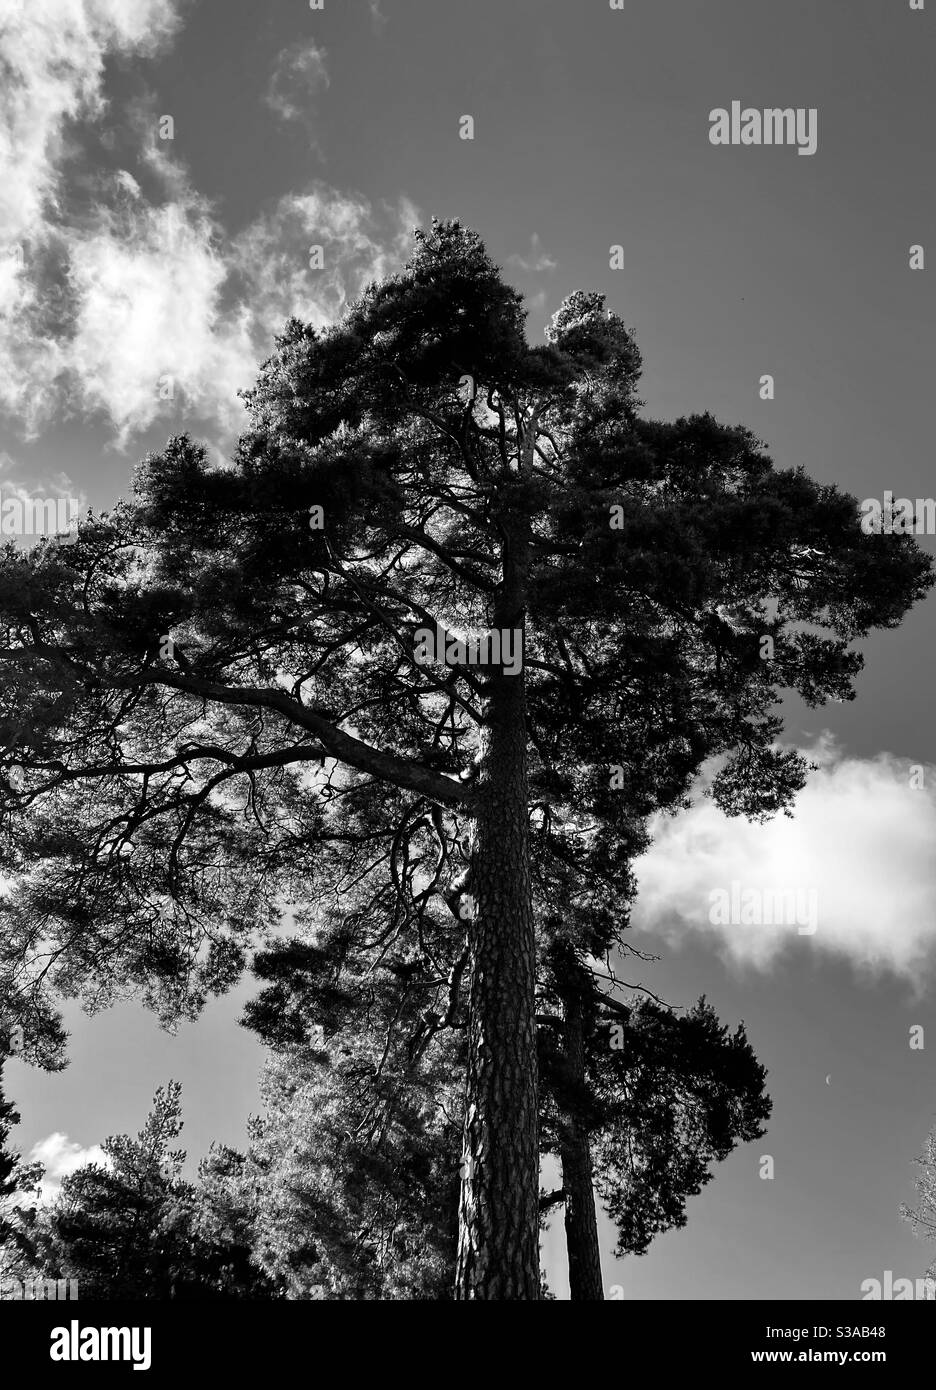 Pinetree in sweden with some clouds in the backround. Thought it Would look cool as black and white. Hope you like it :) Stock Photo